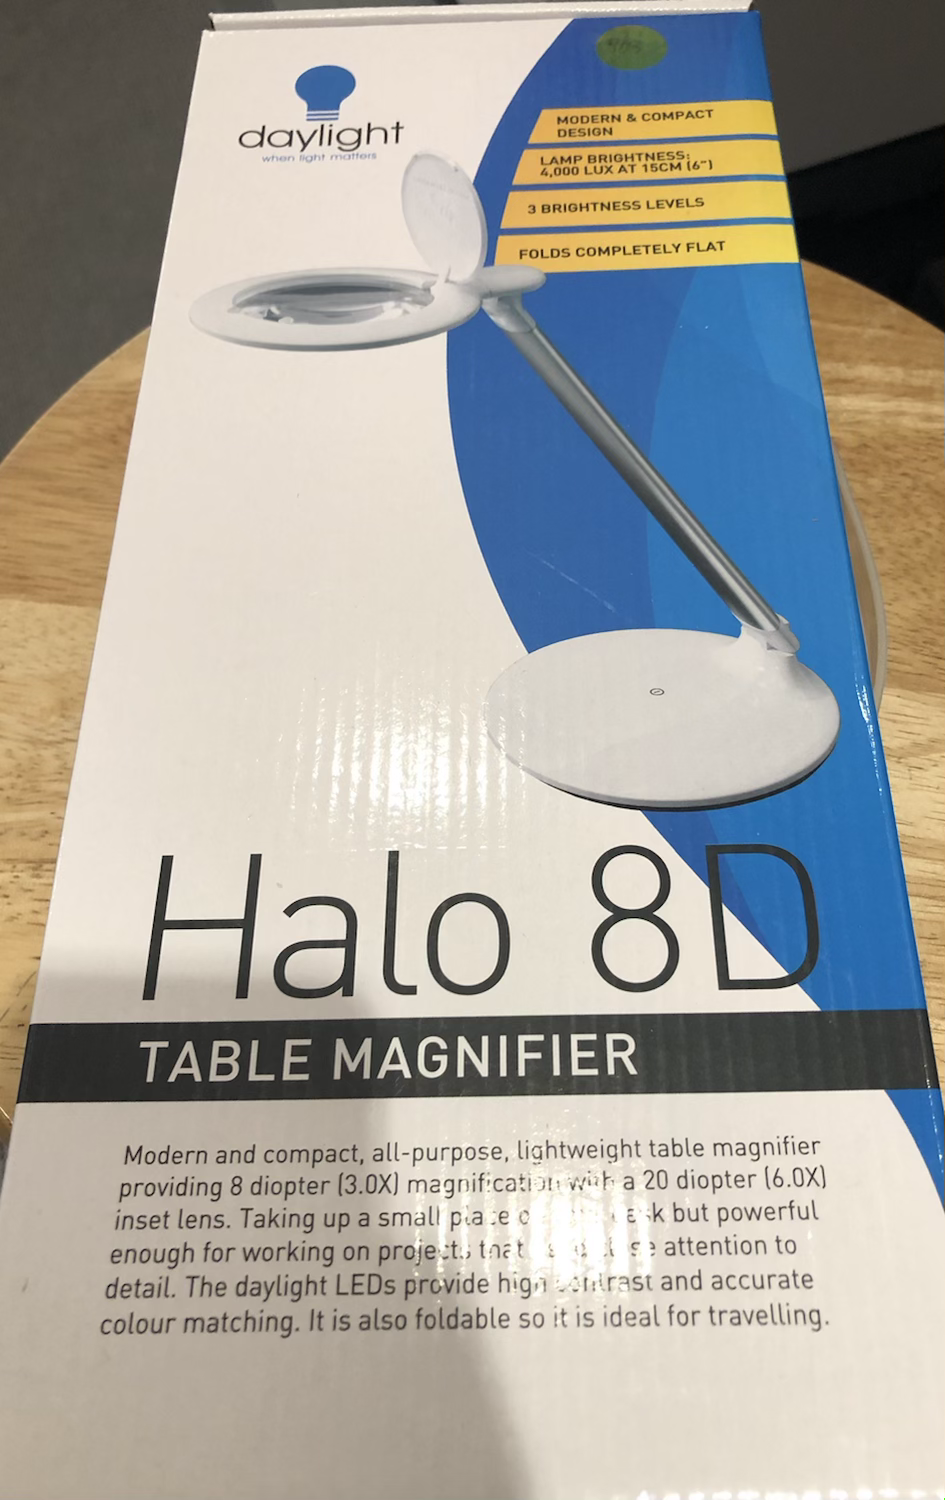 Daylight Halo 8D magnifier